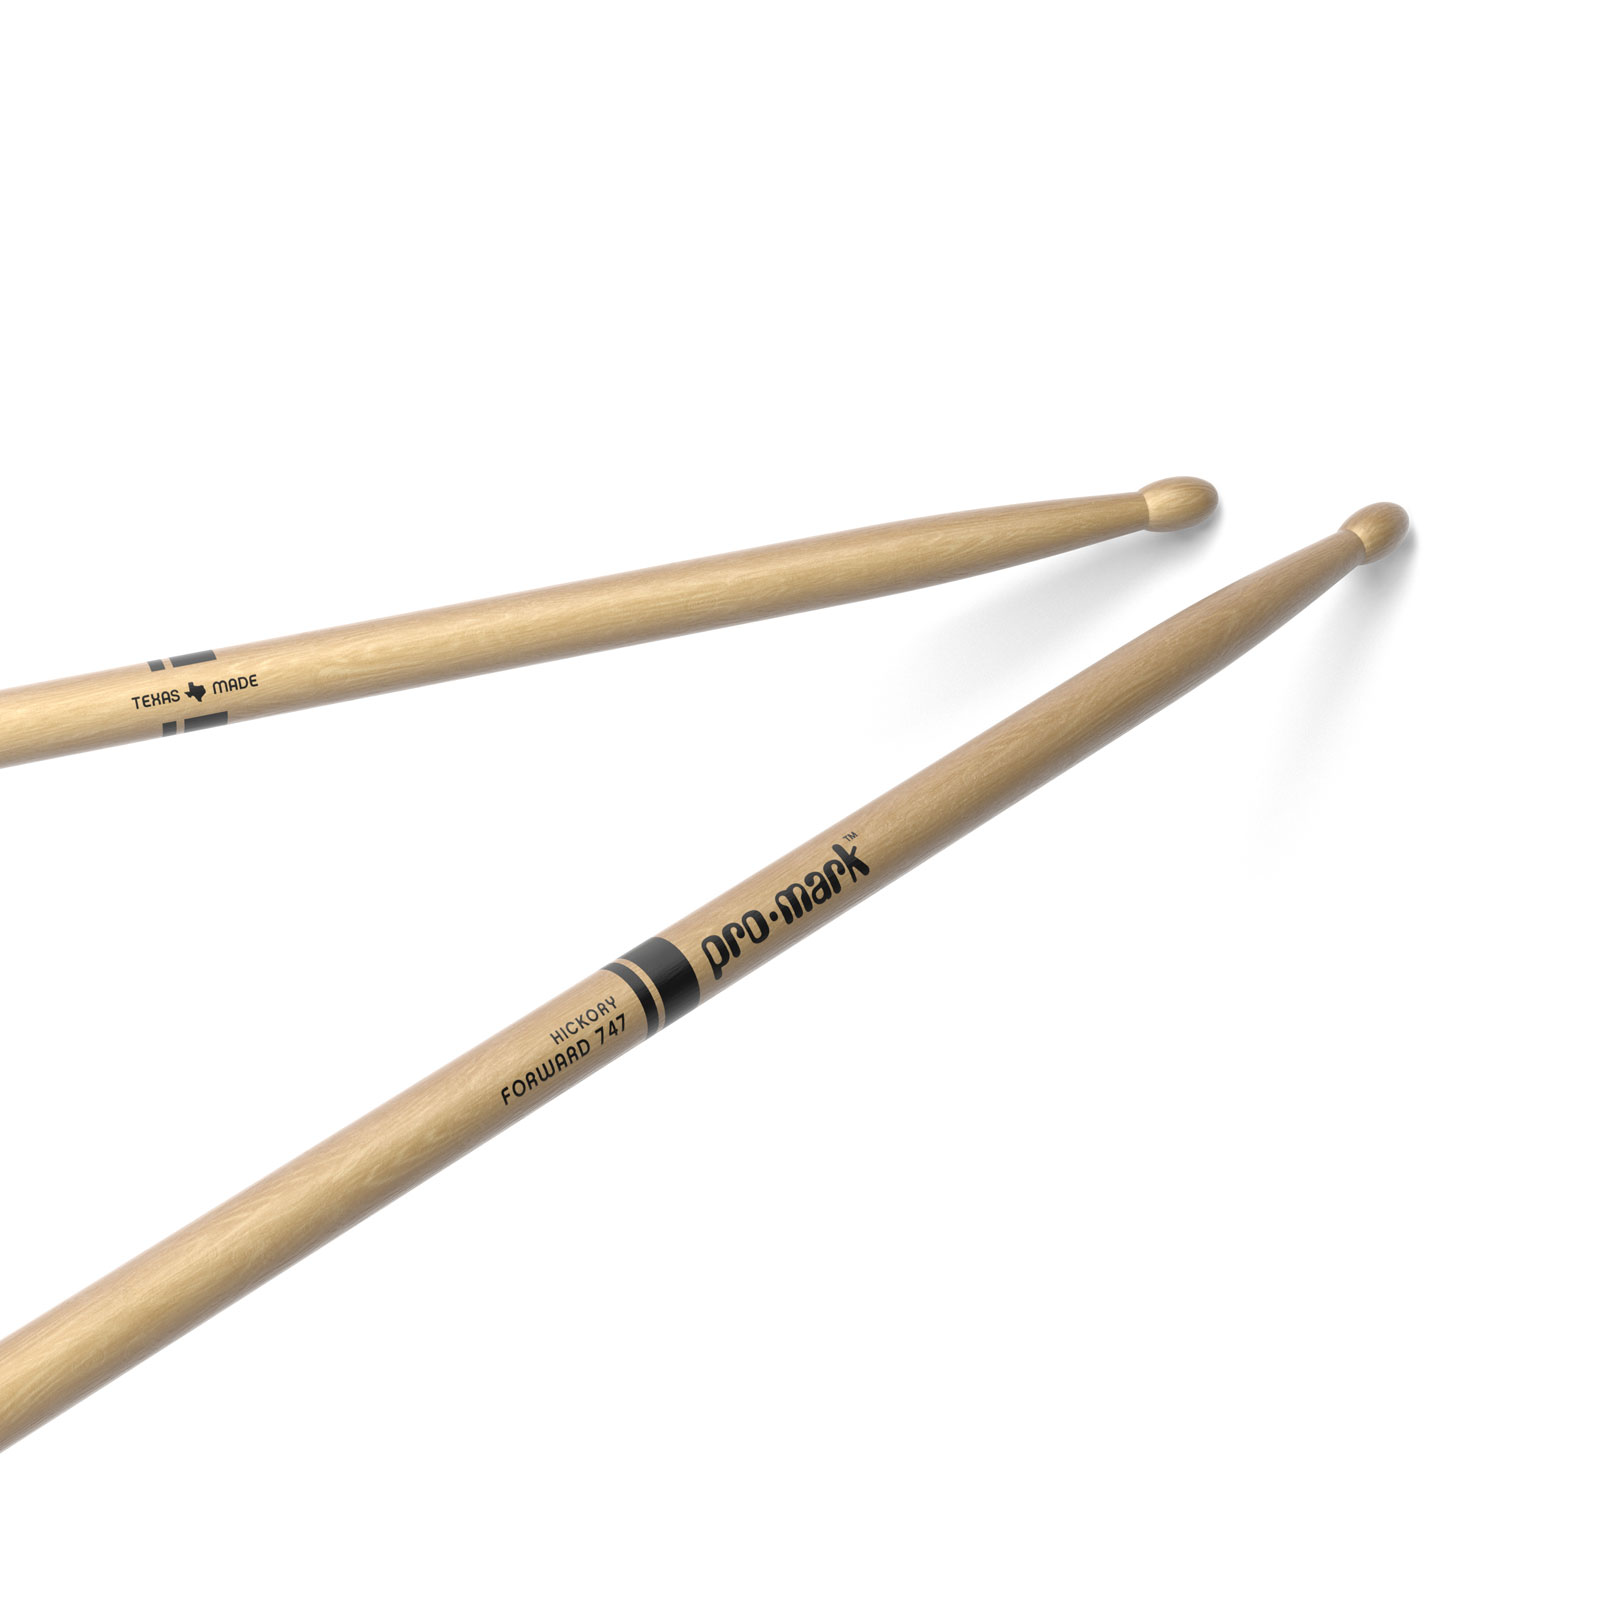 PRO MARK CLASSIC FORWARD 747 HICKORY DRUMSTICK OVAL WOOD TIP